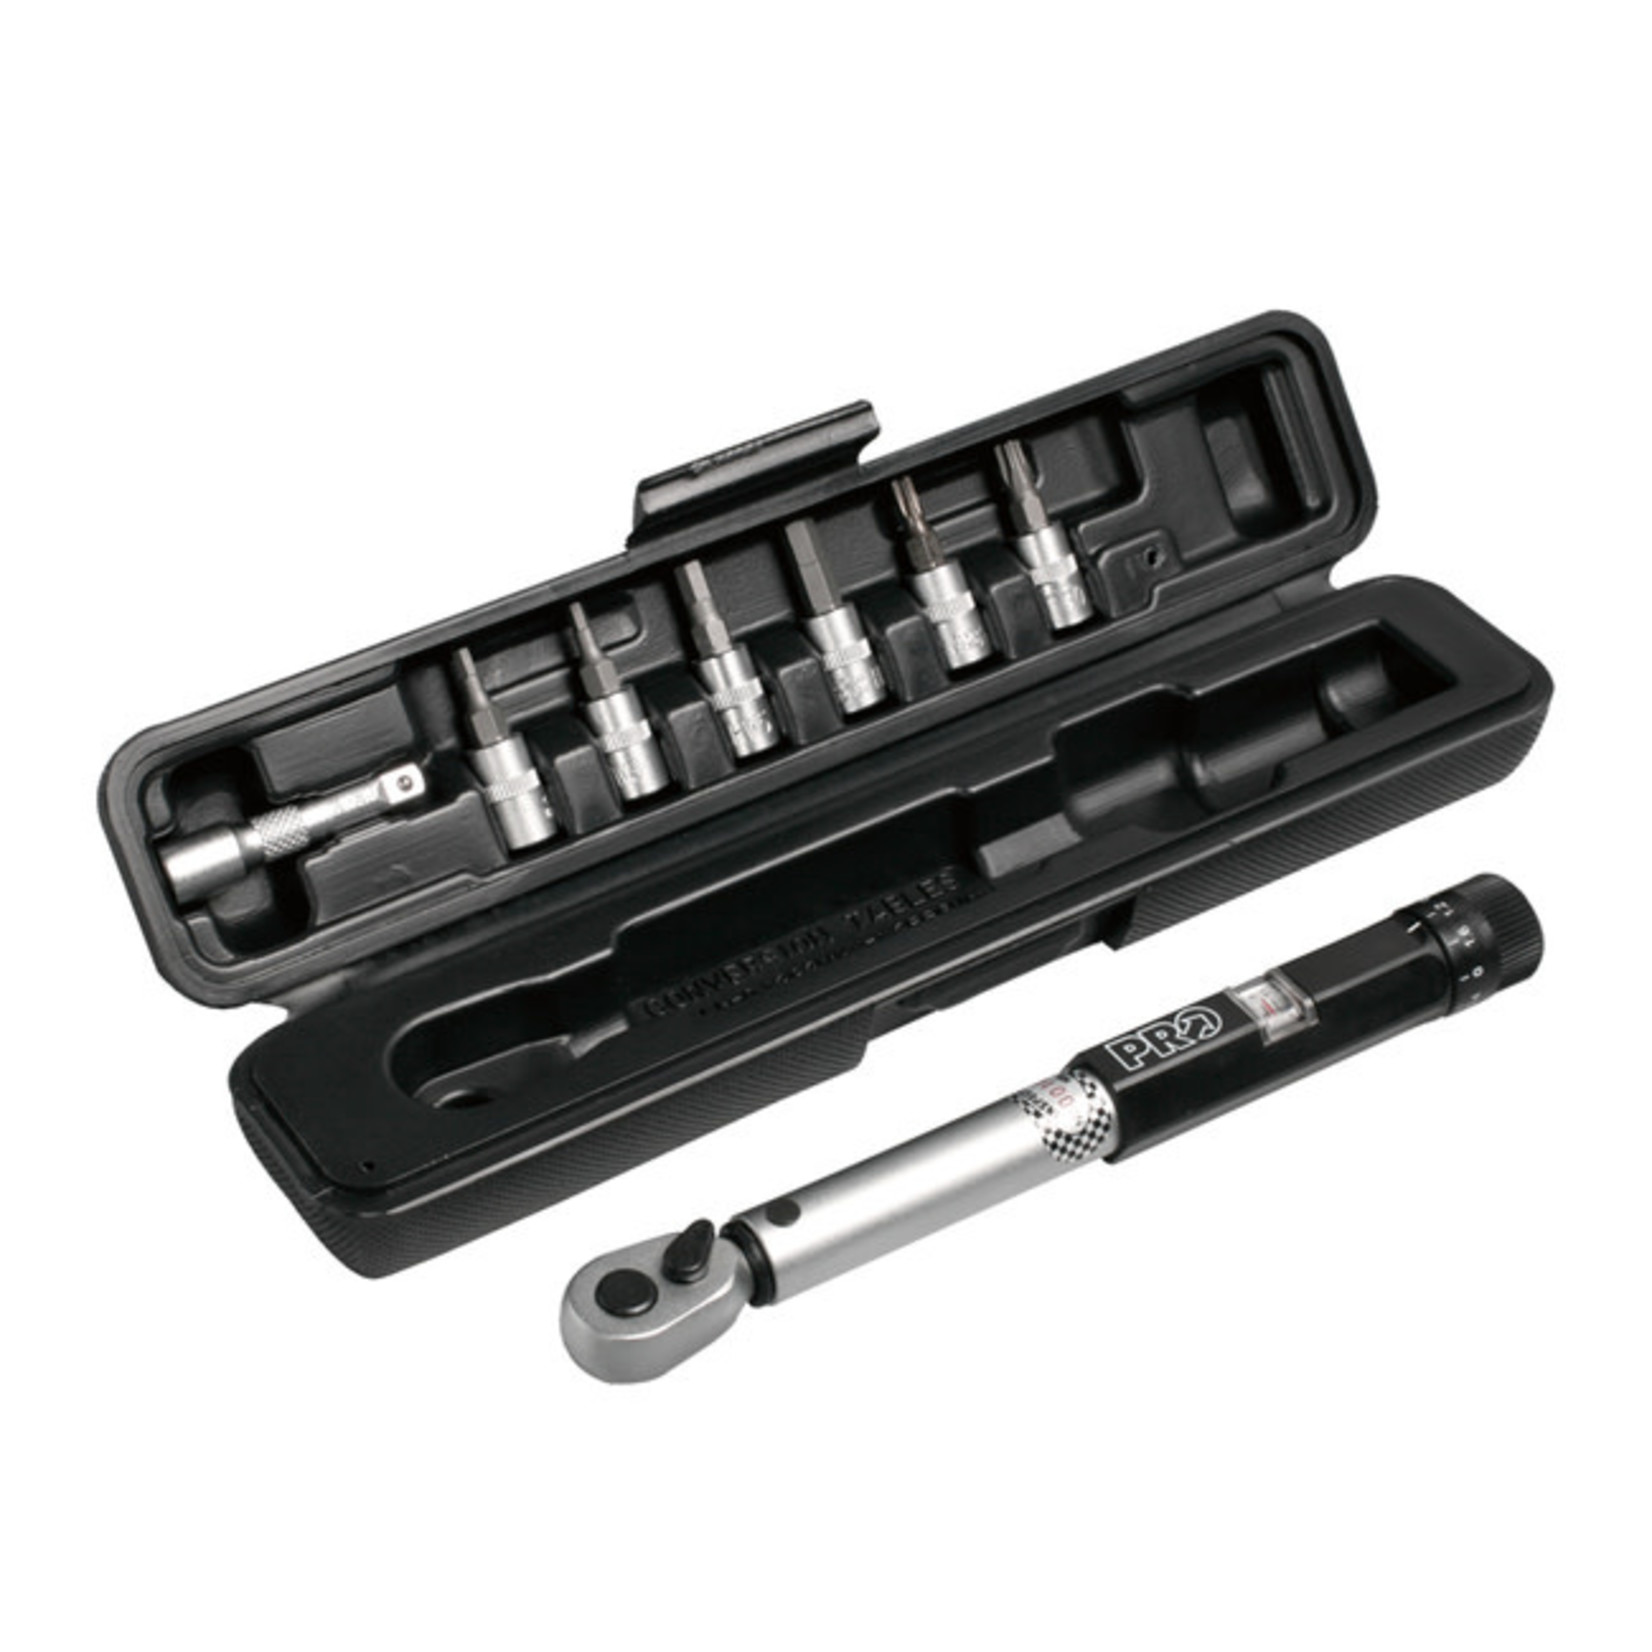 SHIMANO TORQUE WRENCH ADJUSTIBLE 3-15 NM